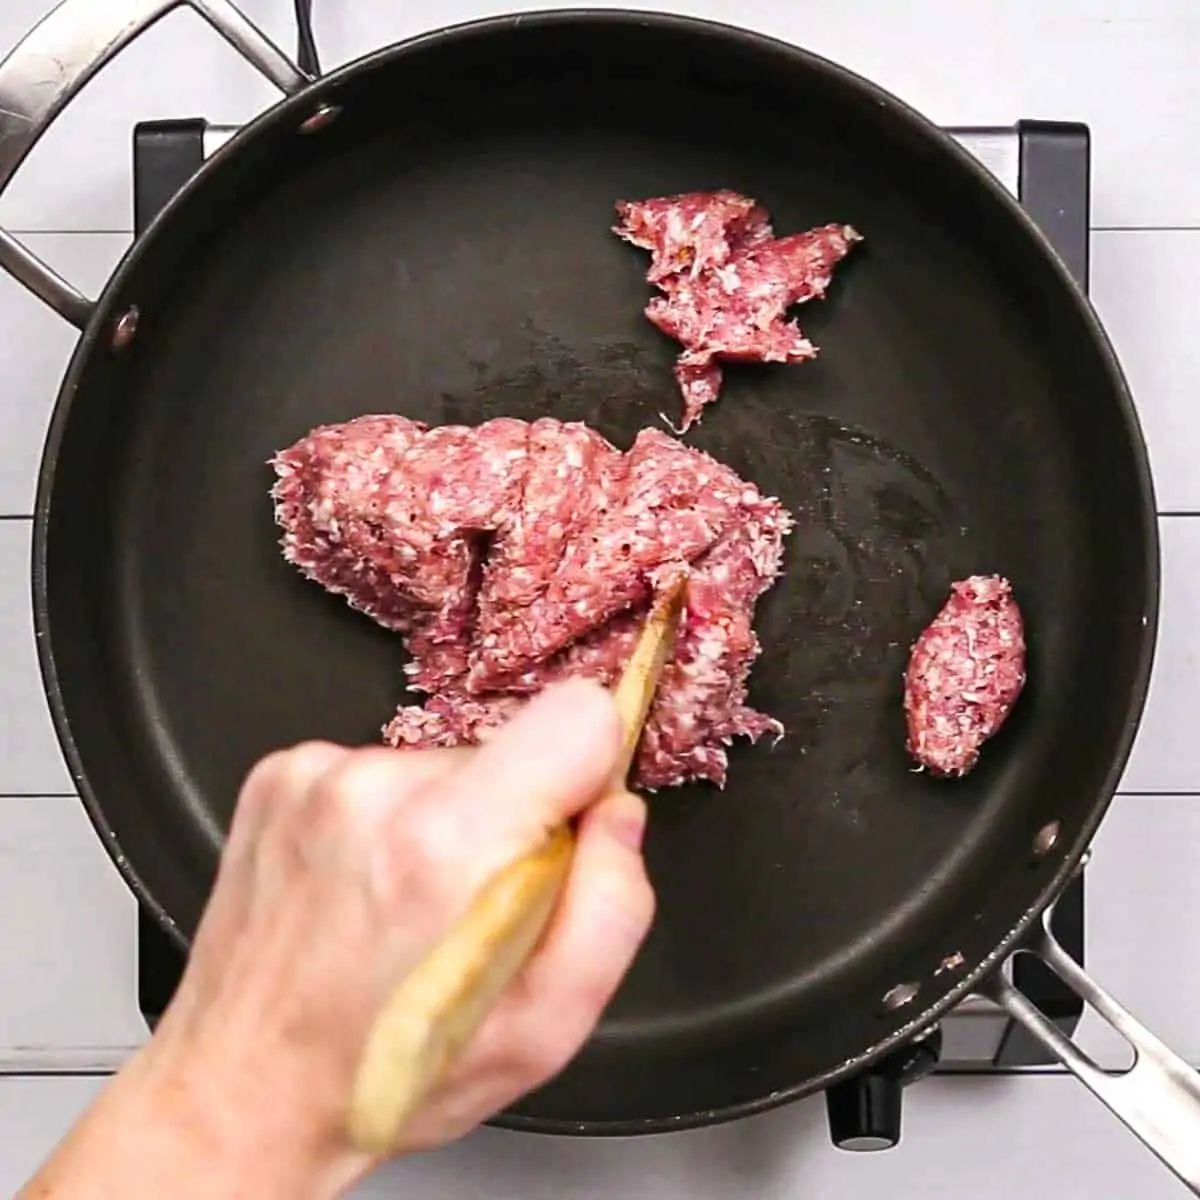 Breaking apart ground meat in a pan for Spinach and Sausage Quiche